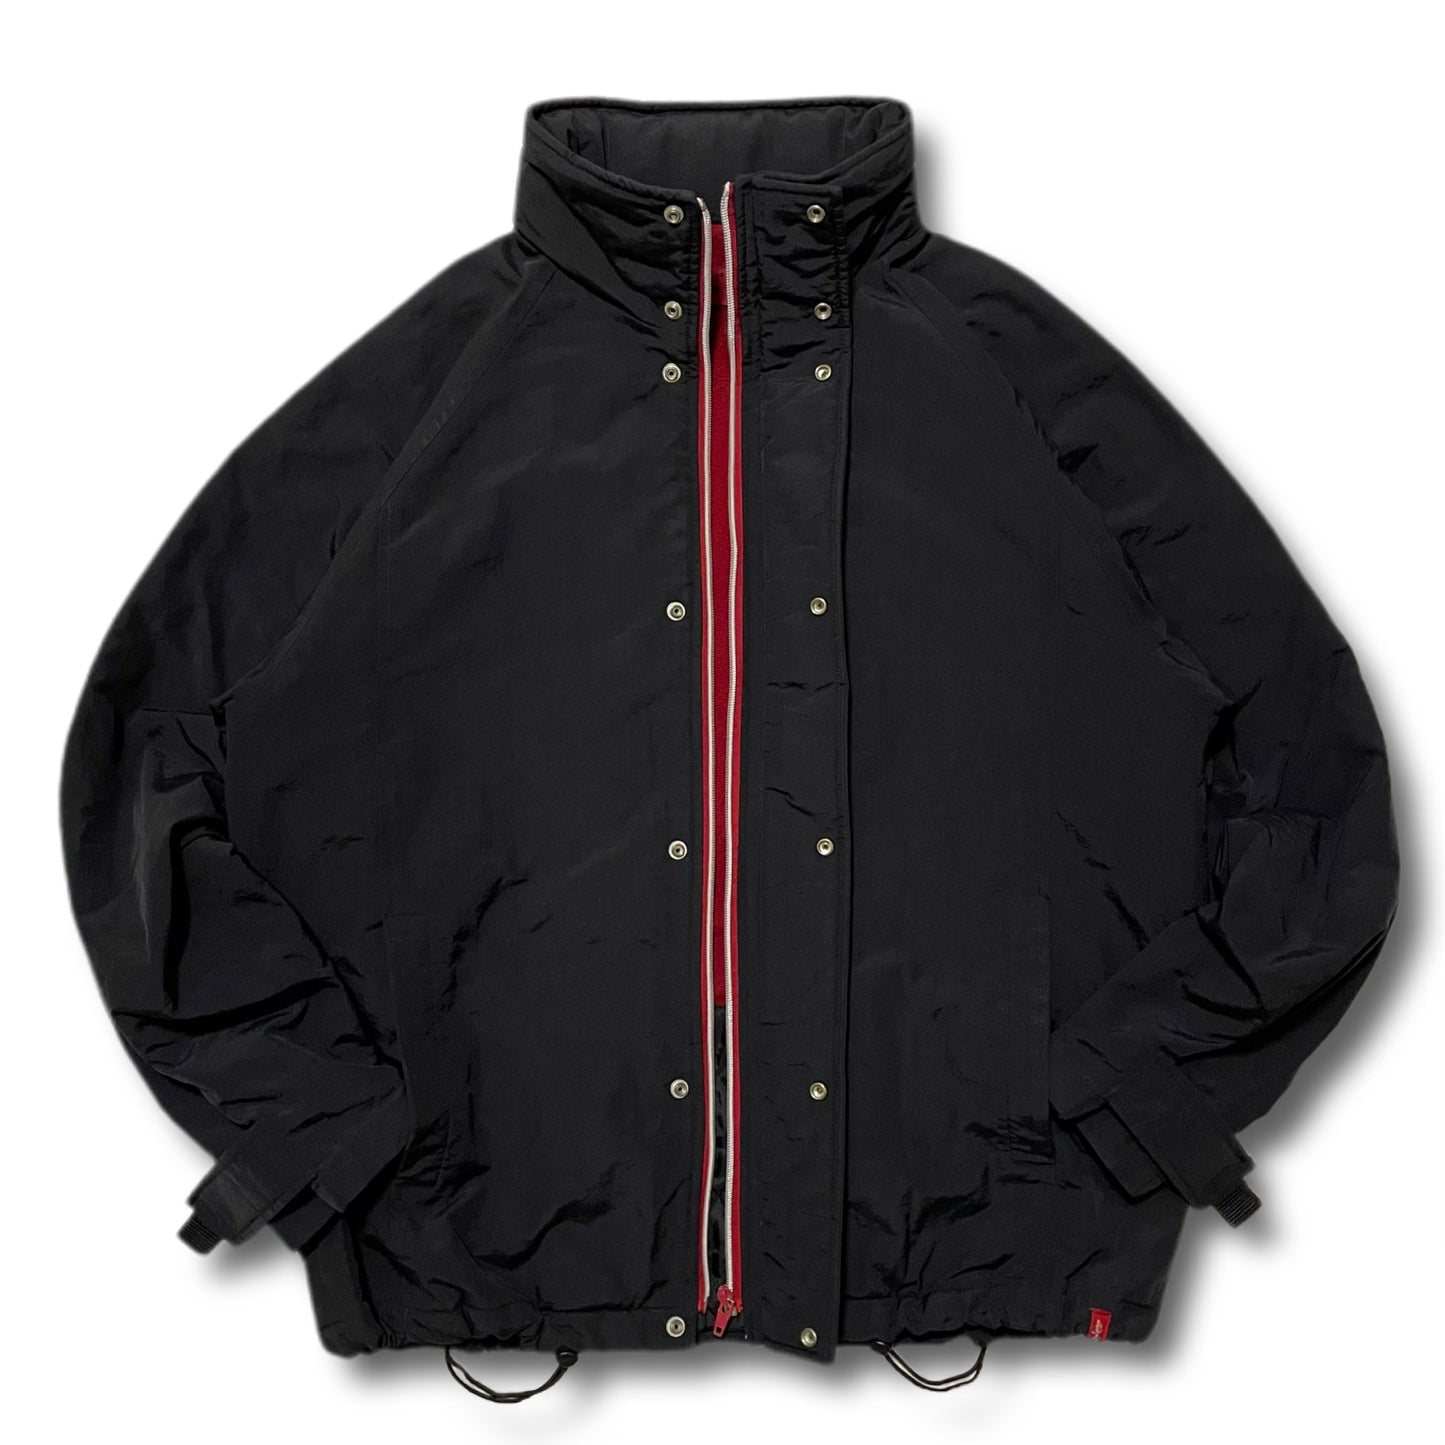 Levi's Red Tab Technical Field Jacket